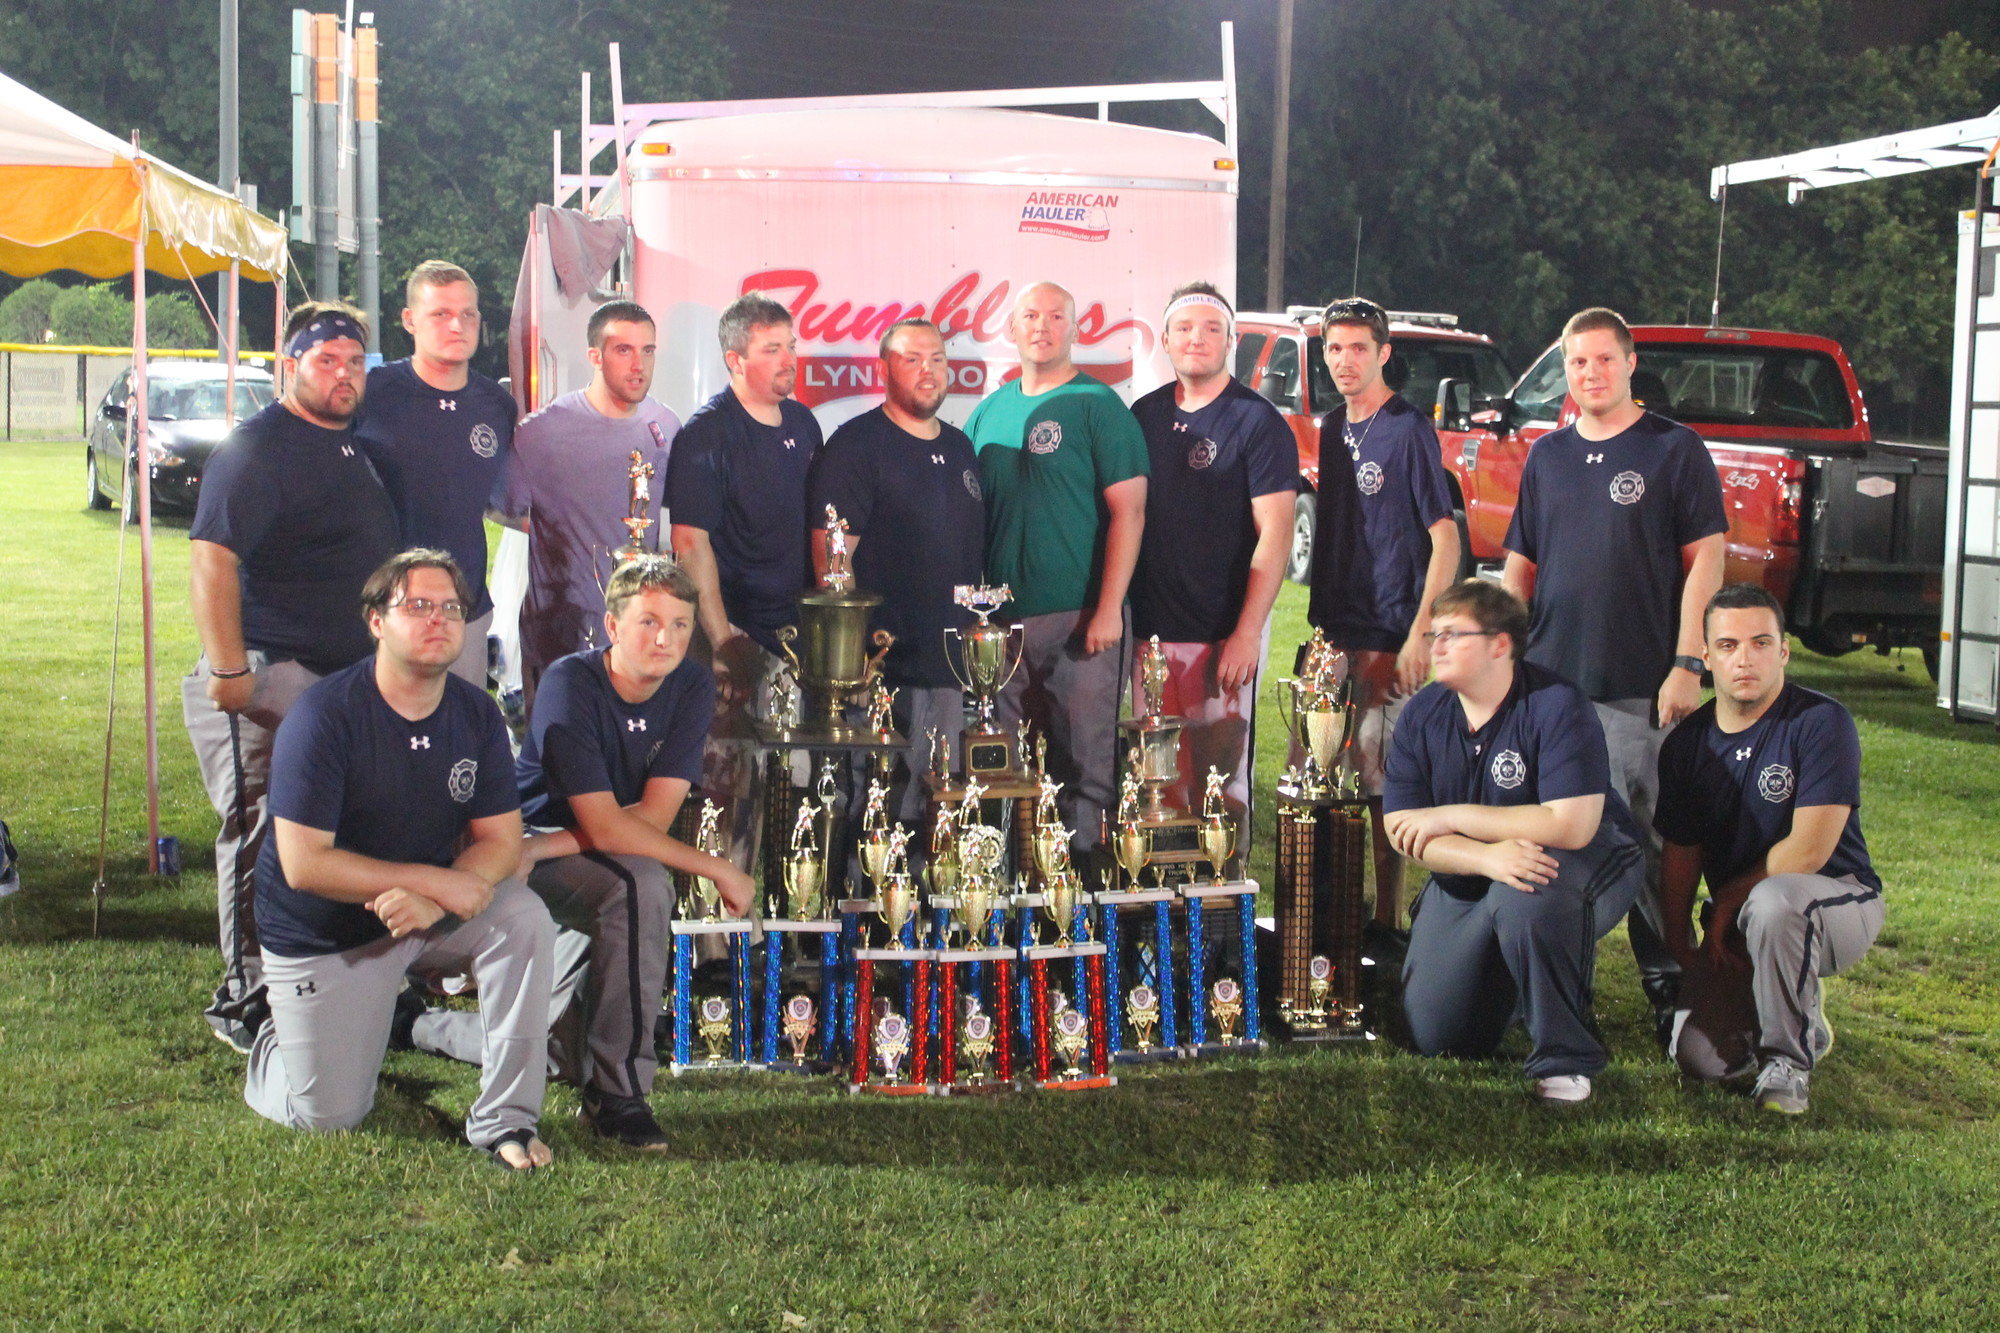 Lynbrook Fire Department’s Tournament Team, the Tumblers, posed with their winning trophies after the competition.